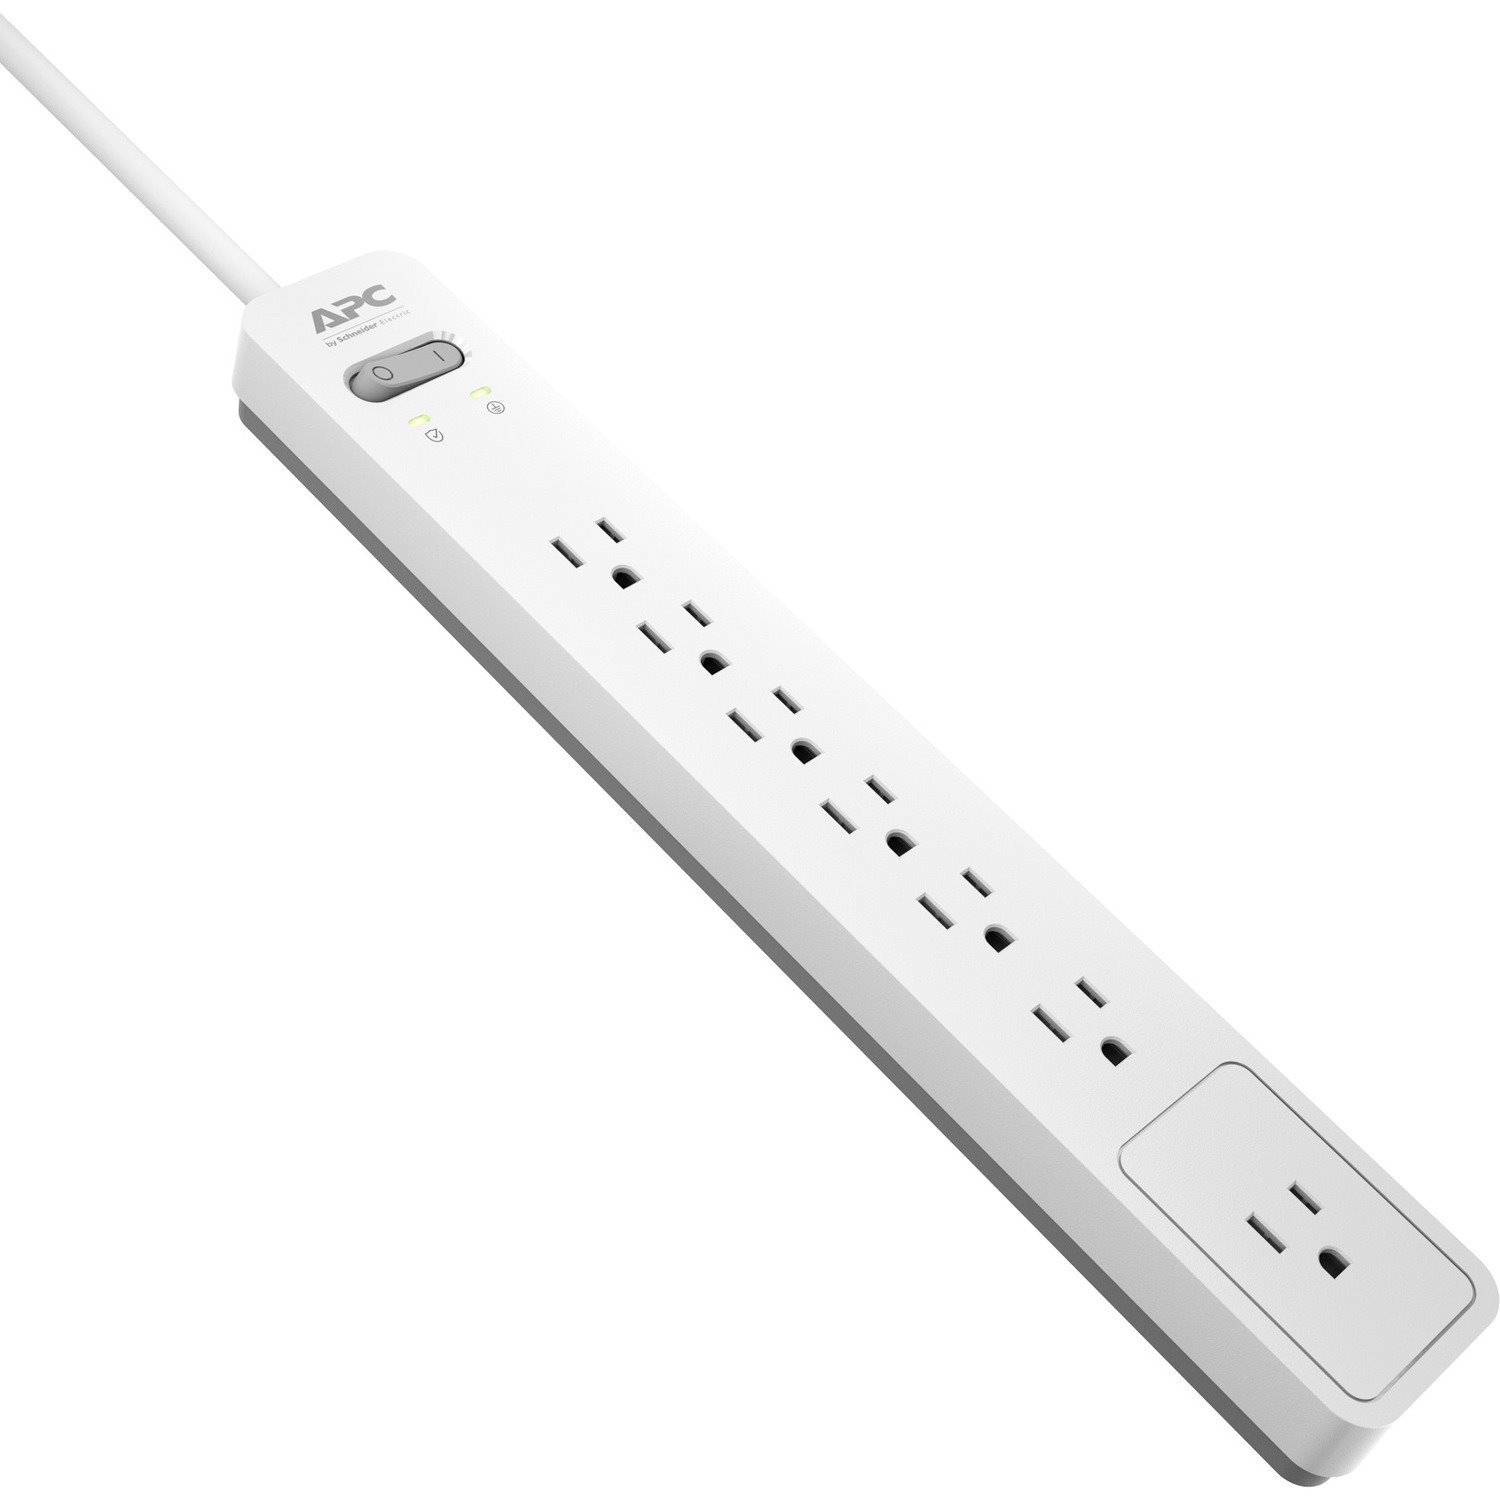 APC by Schneider Electric Essential SurgeArrest 7 Outlet 6 Foot Cord 120V, White and Grey